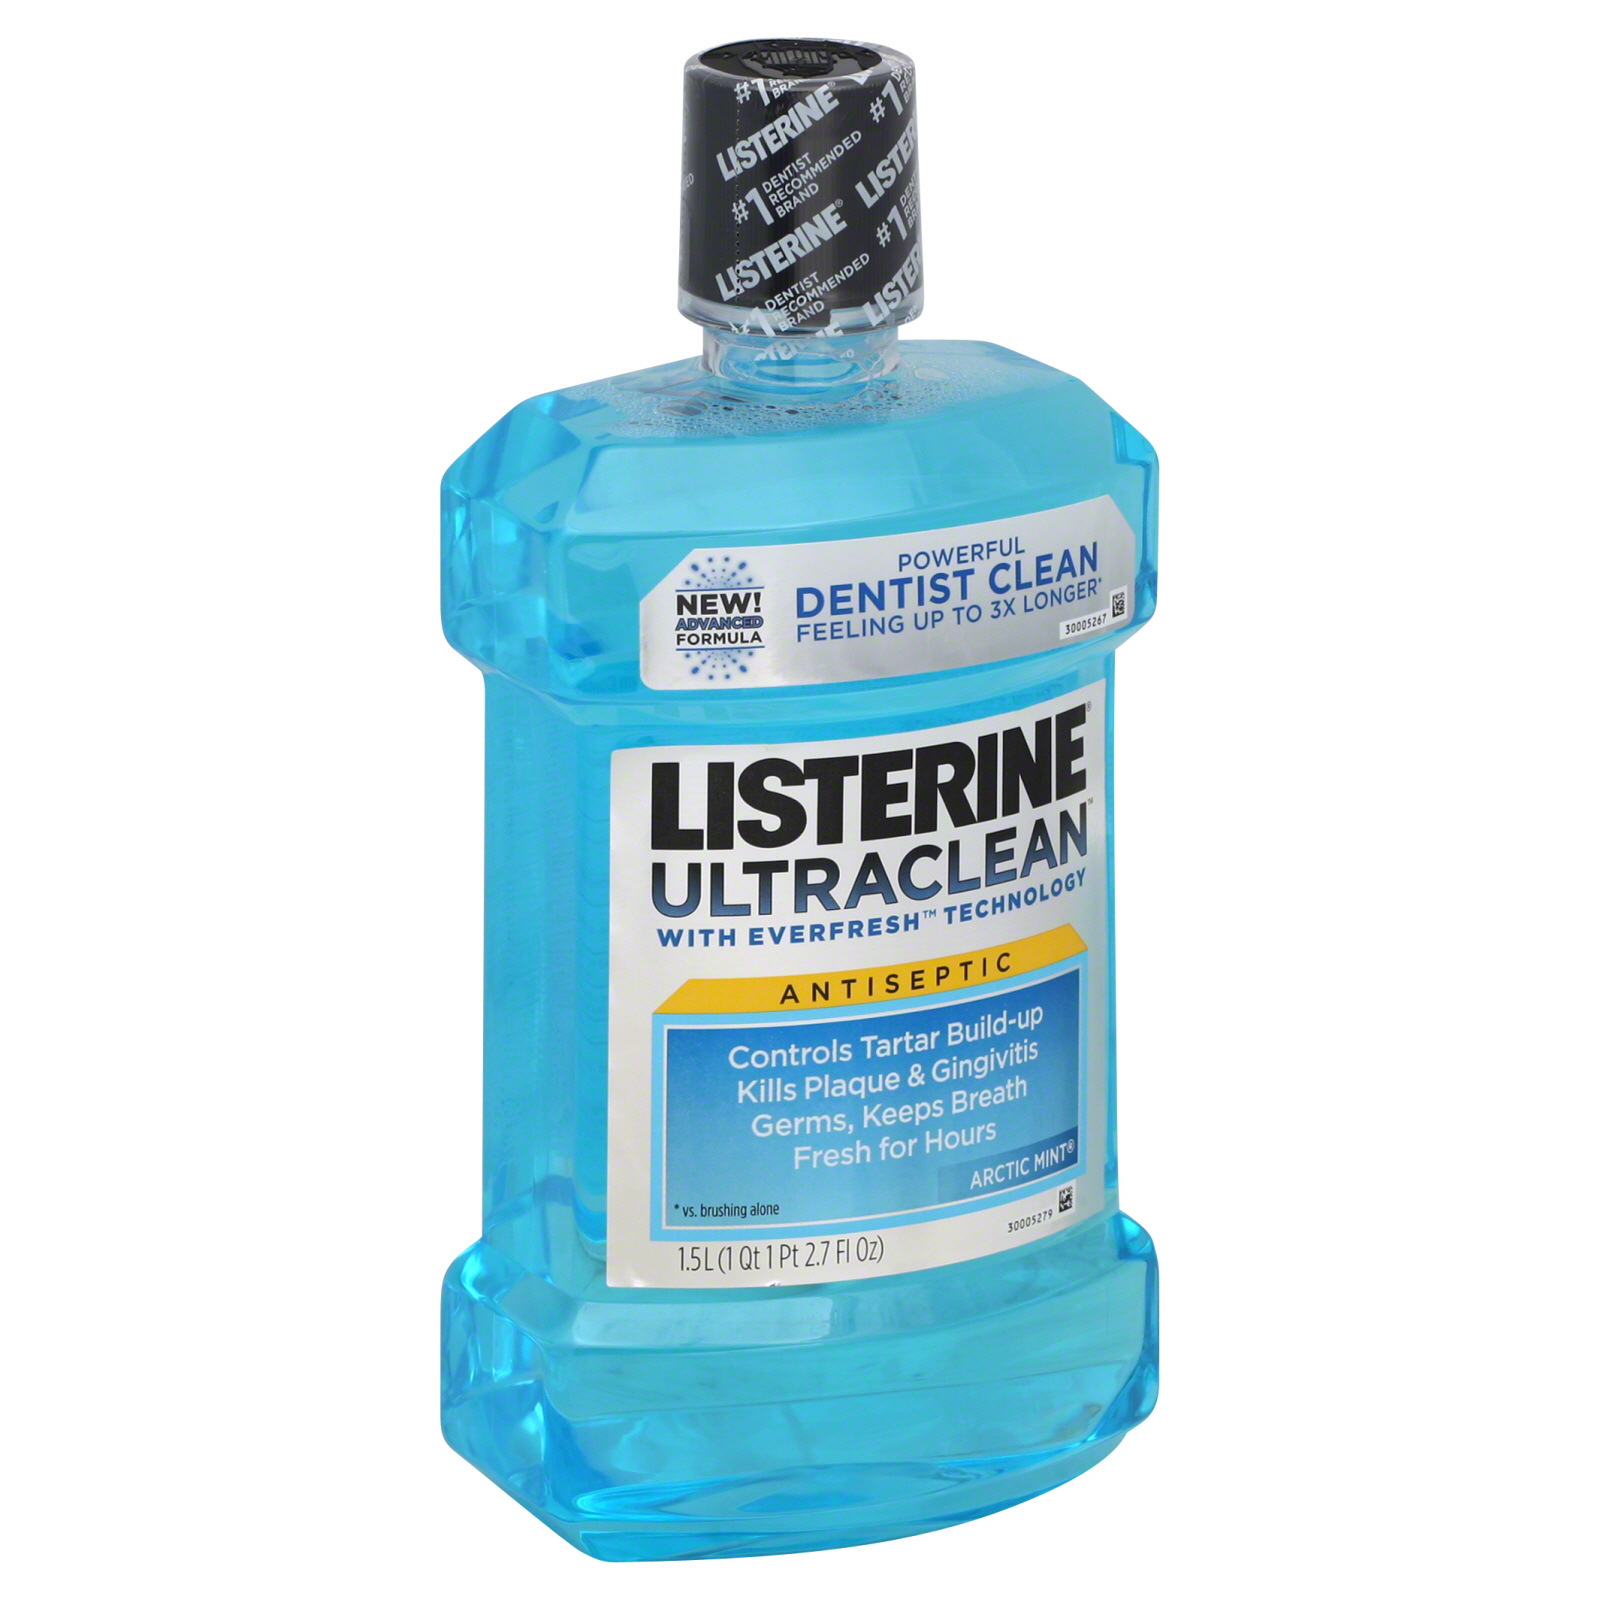 Listerine  Ultraclean Oral Care Antiseptic Mouthwash, Arctic Mint, 1.5 l